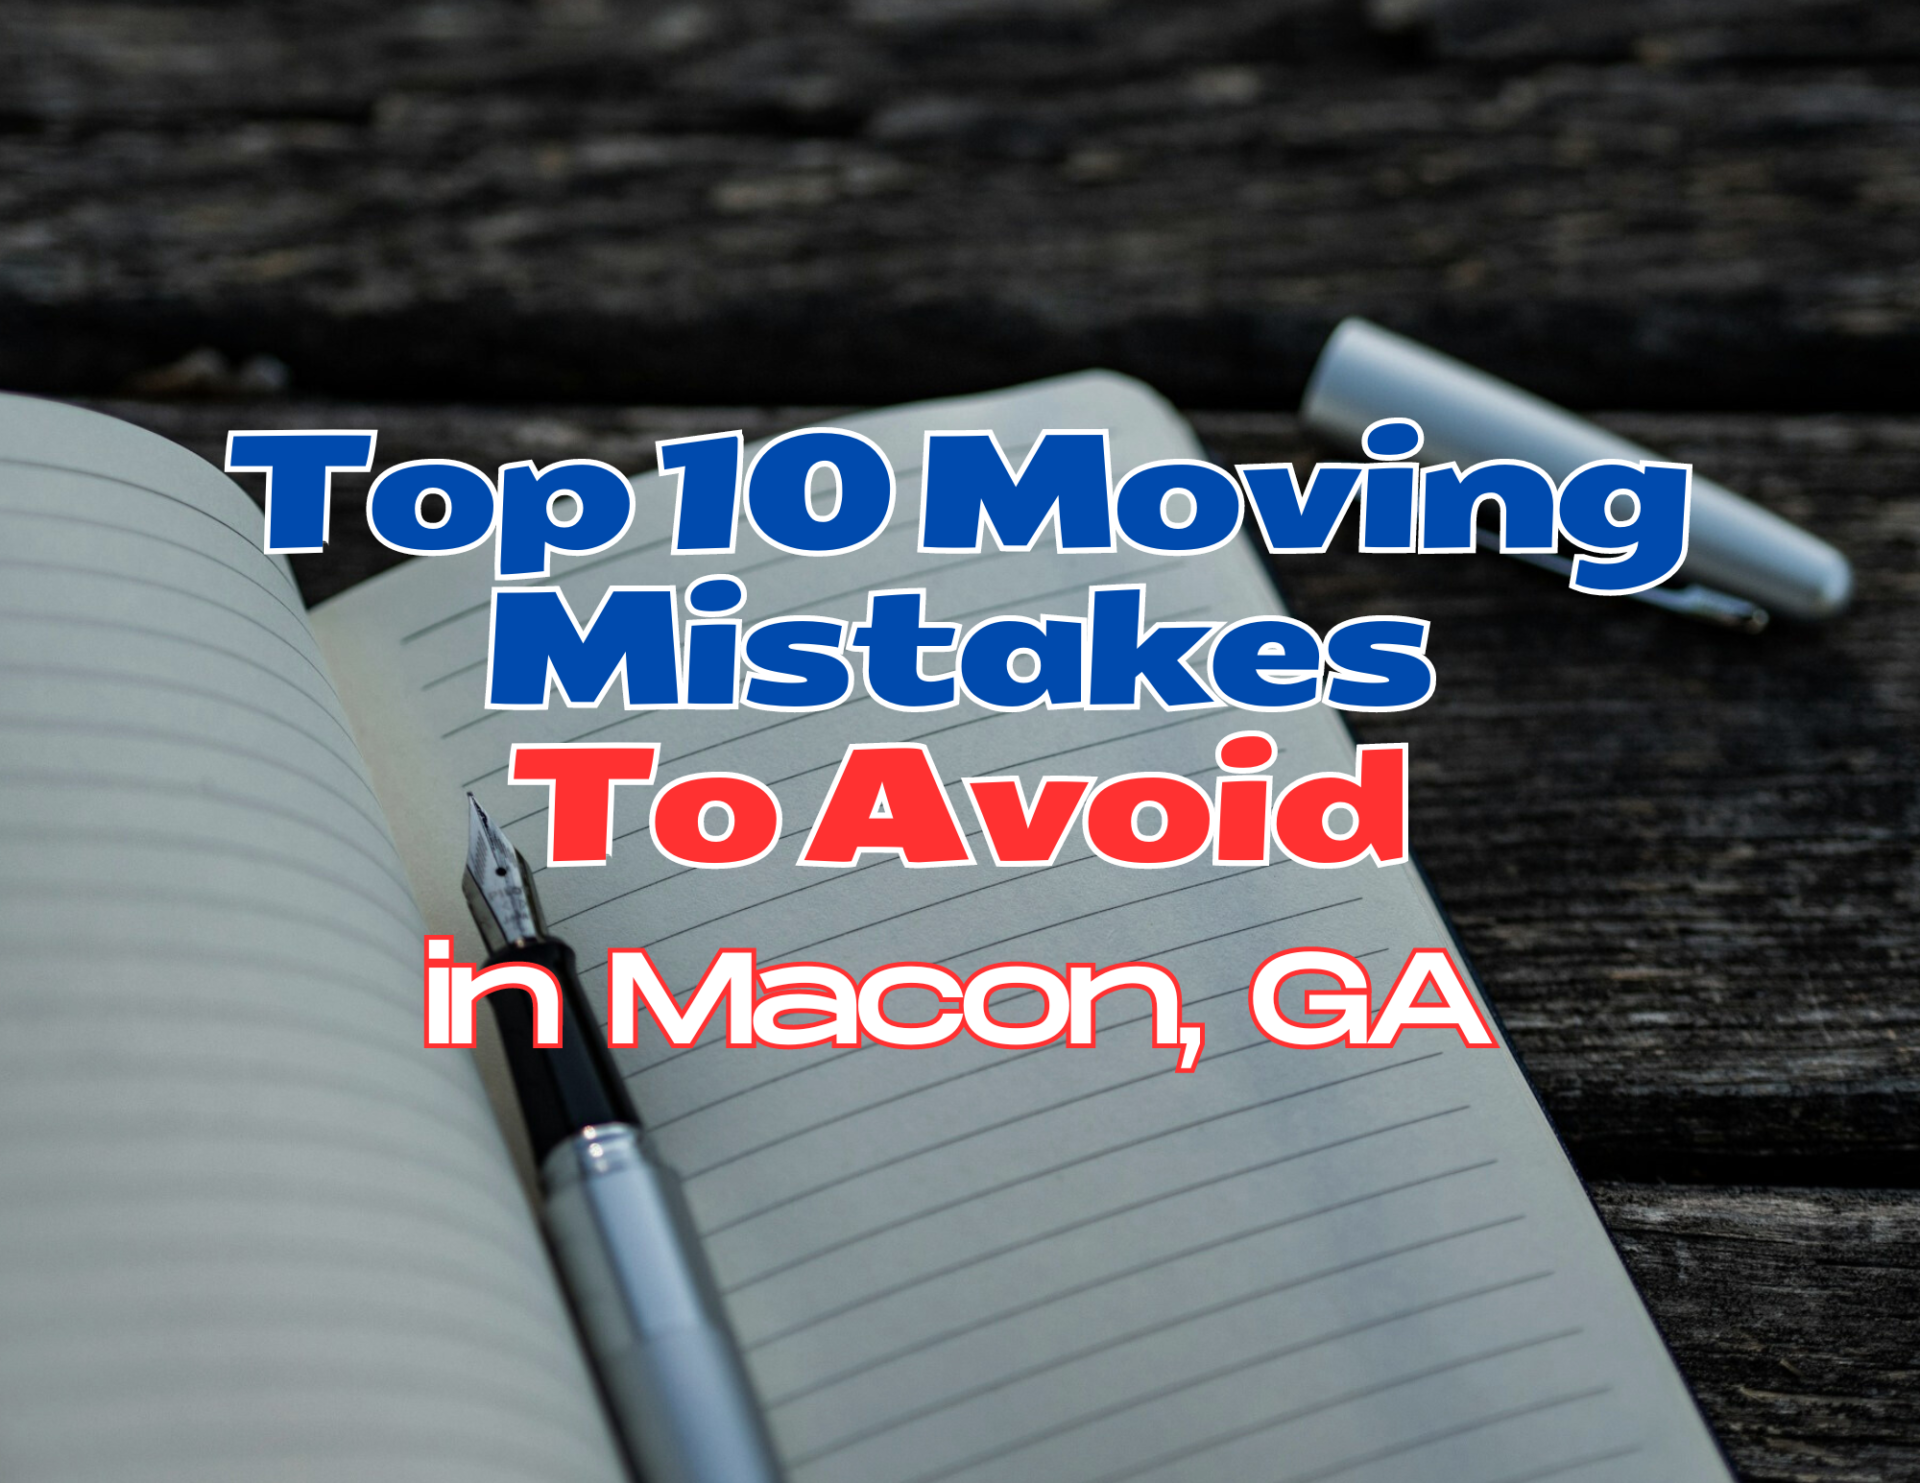 Avoid Moving Mistakes Macon GA Top 10 Moving Mistakes to Avoid in Macon, GA